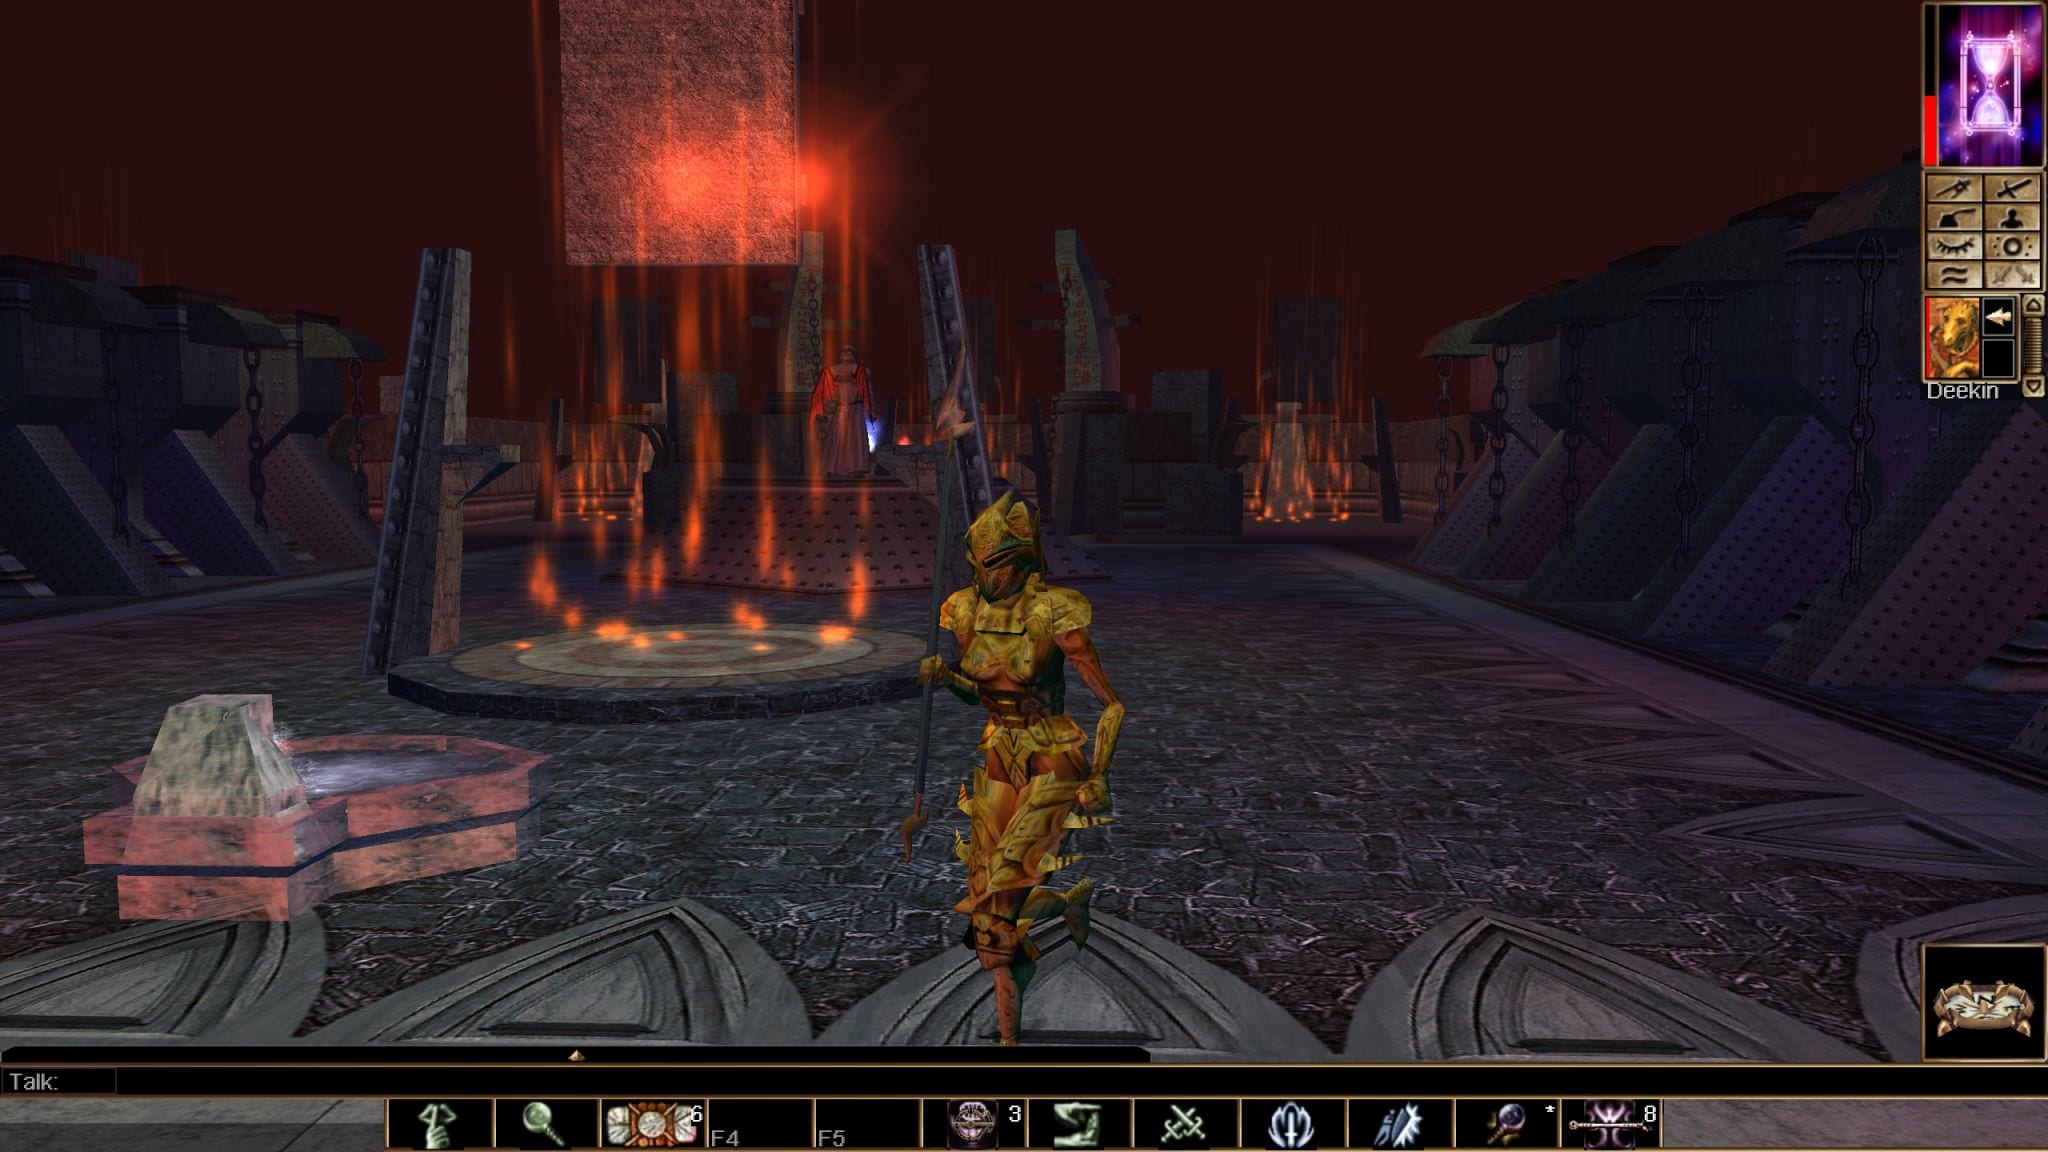 neverwinter nights enhanced edition android family library